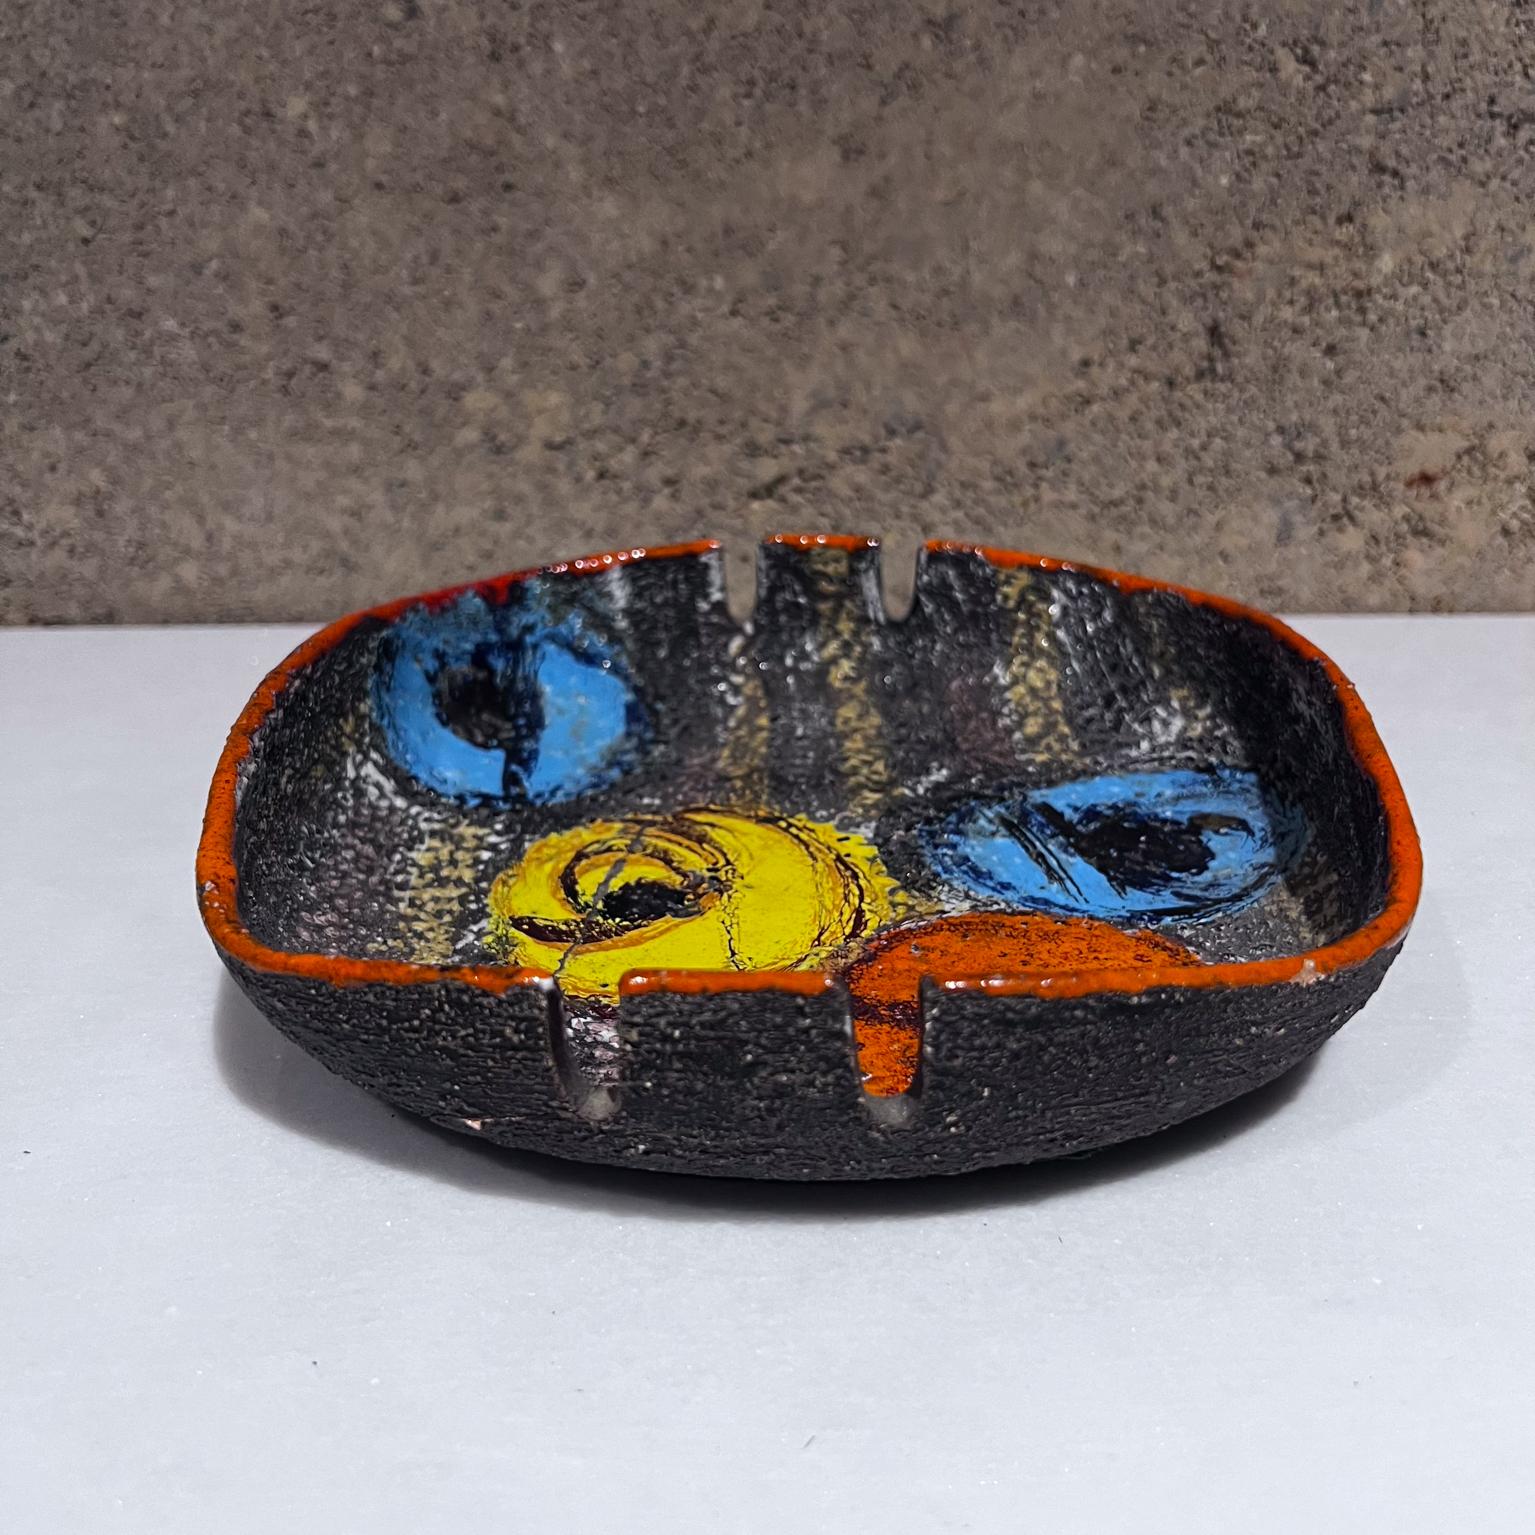 1960s Modern Italian Colorful Ashtray
attributed Alvino Bagni for Raymor
Stamped Italy
1.5 h x 7.75 x 7.75
Unrestored original vintage preowned condition
Ashtray has a crack.
Review all images as provided.